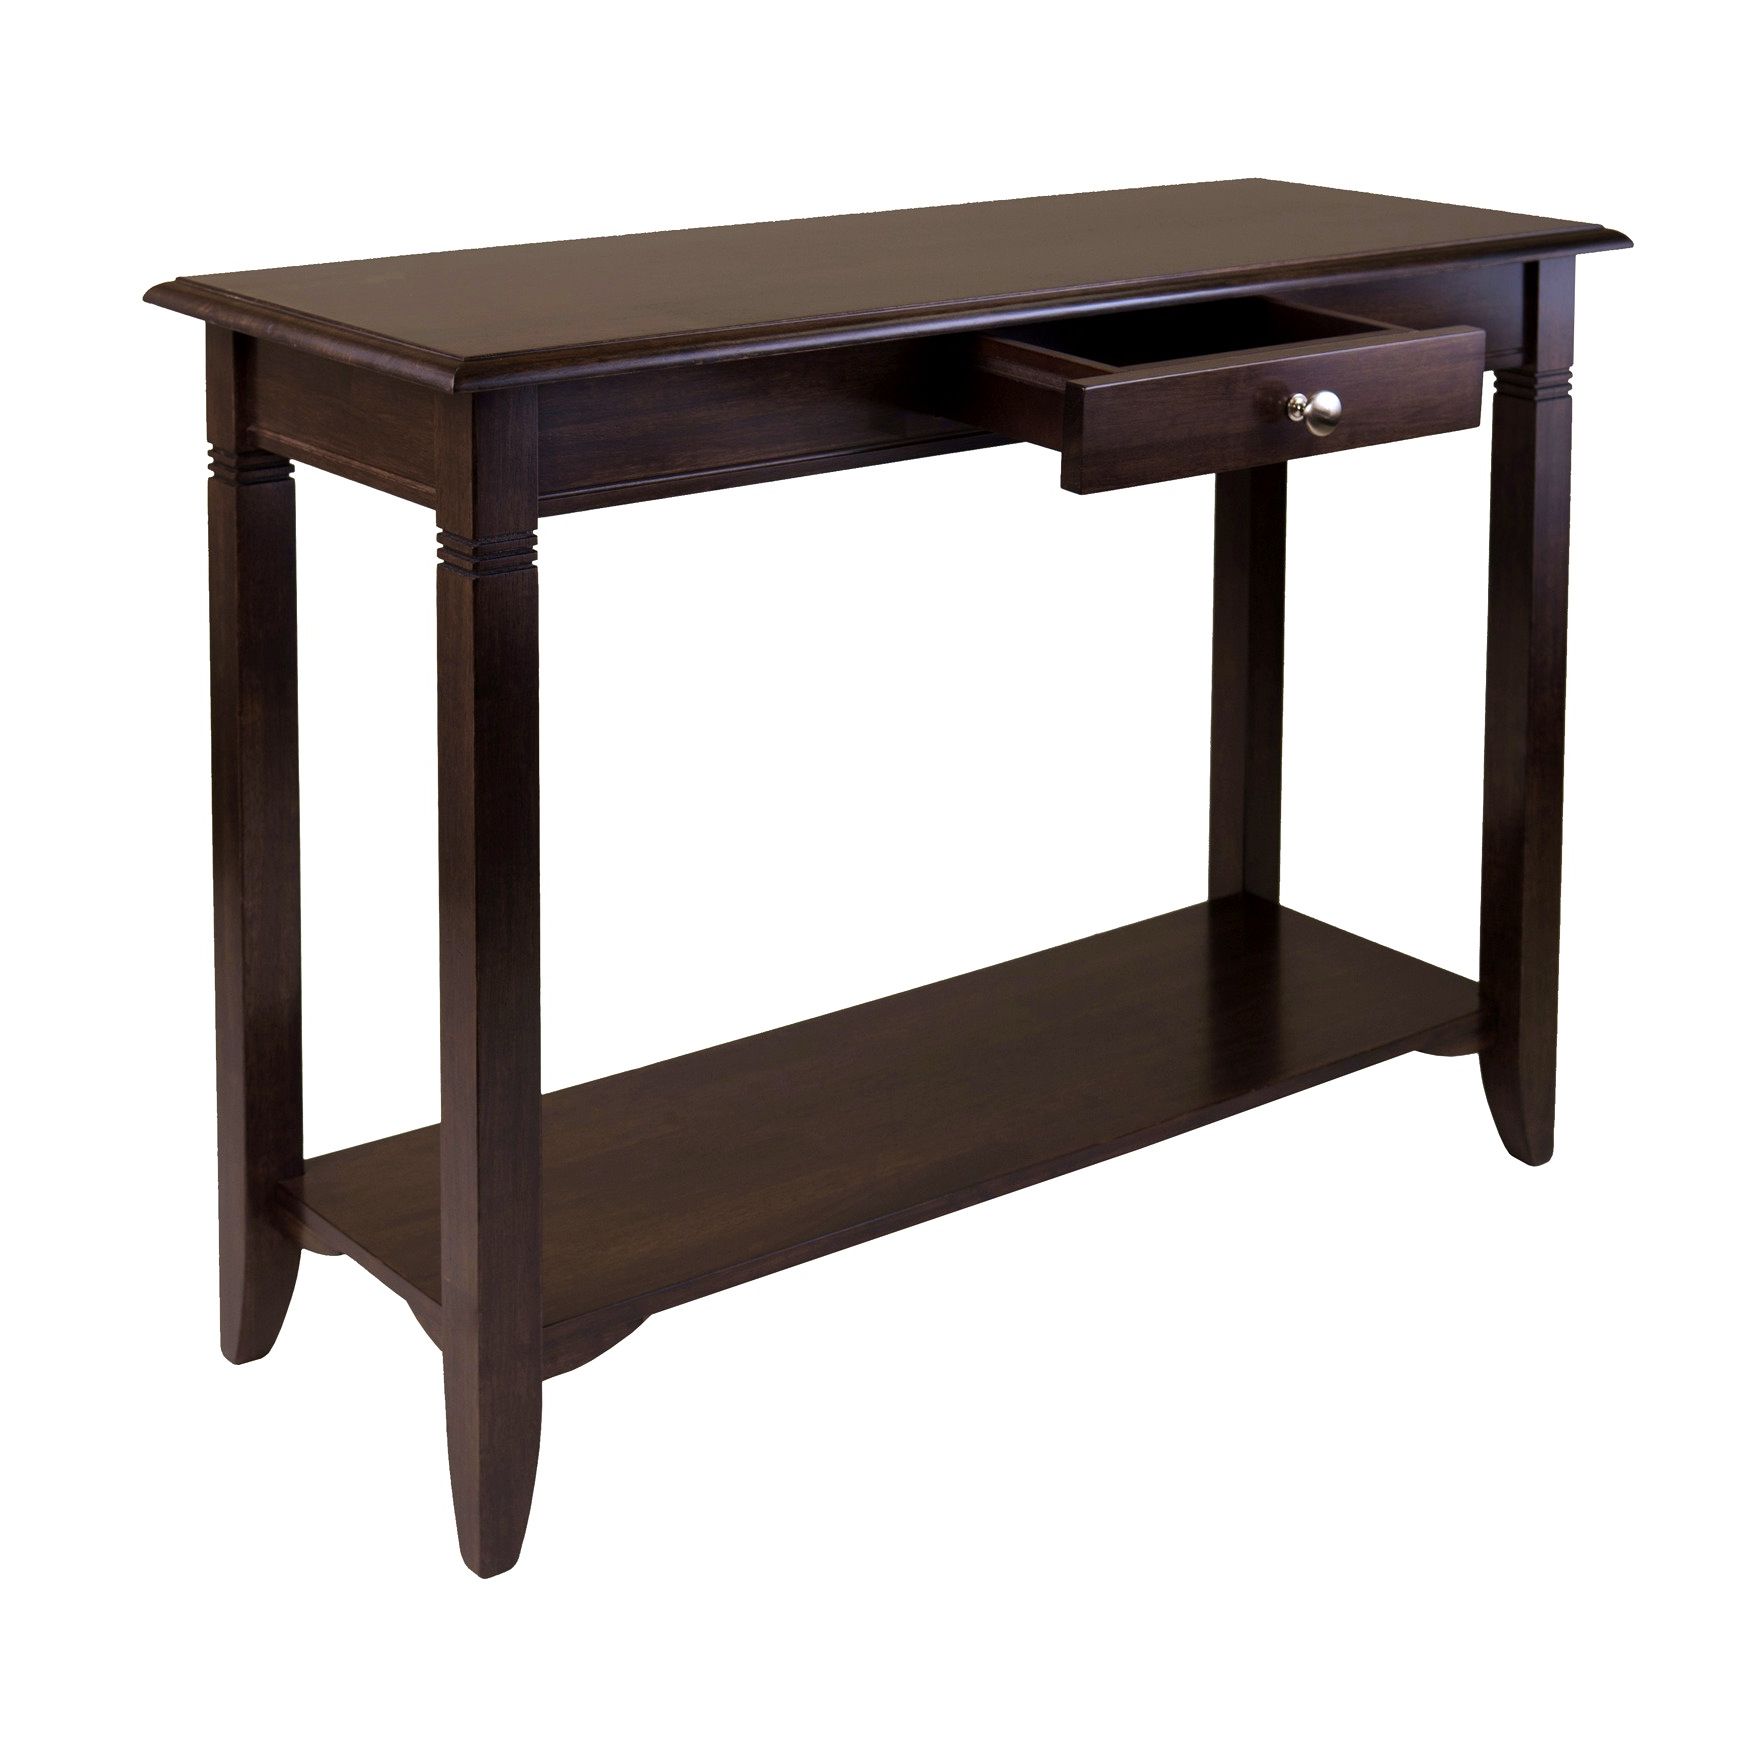 Standard Sofa Table Dimensions Mesmerizing Sofa Table Brown Console Pertaining To Echelon Console Tables (View 10 of 20)